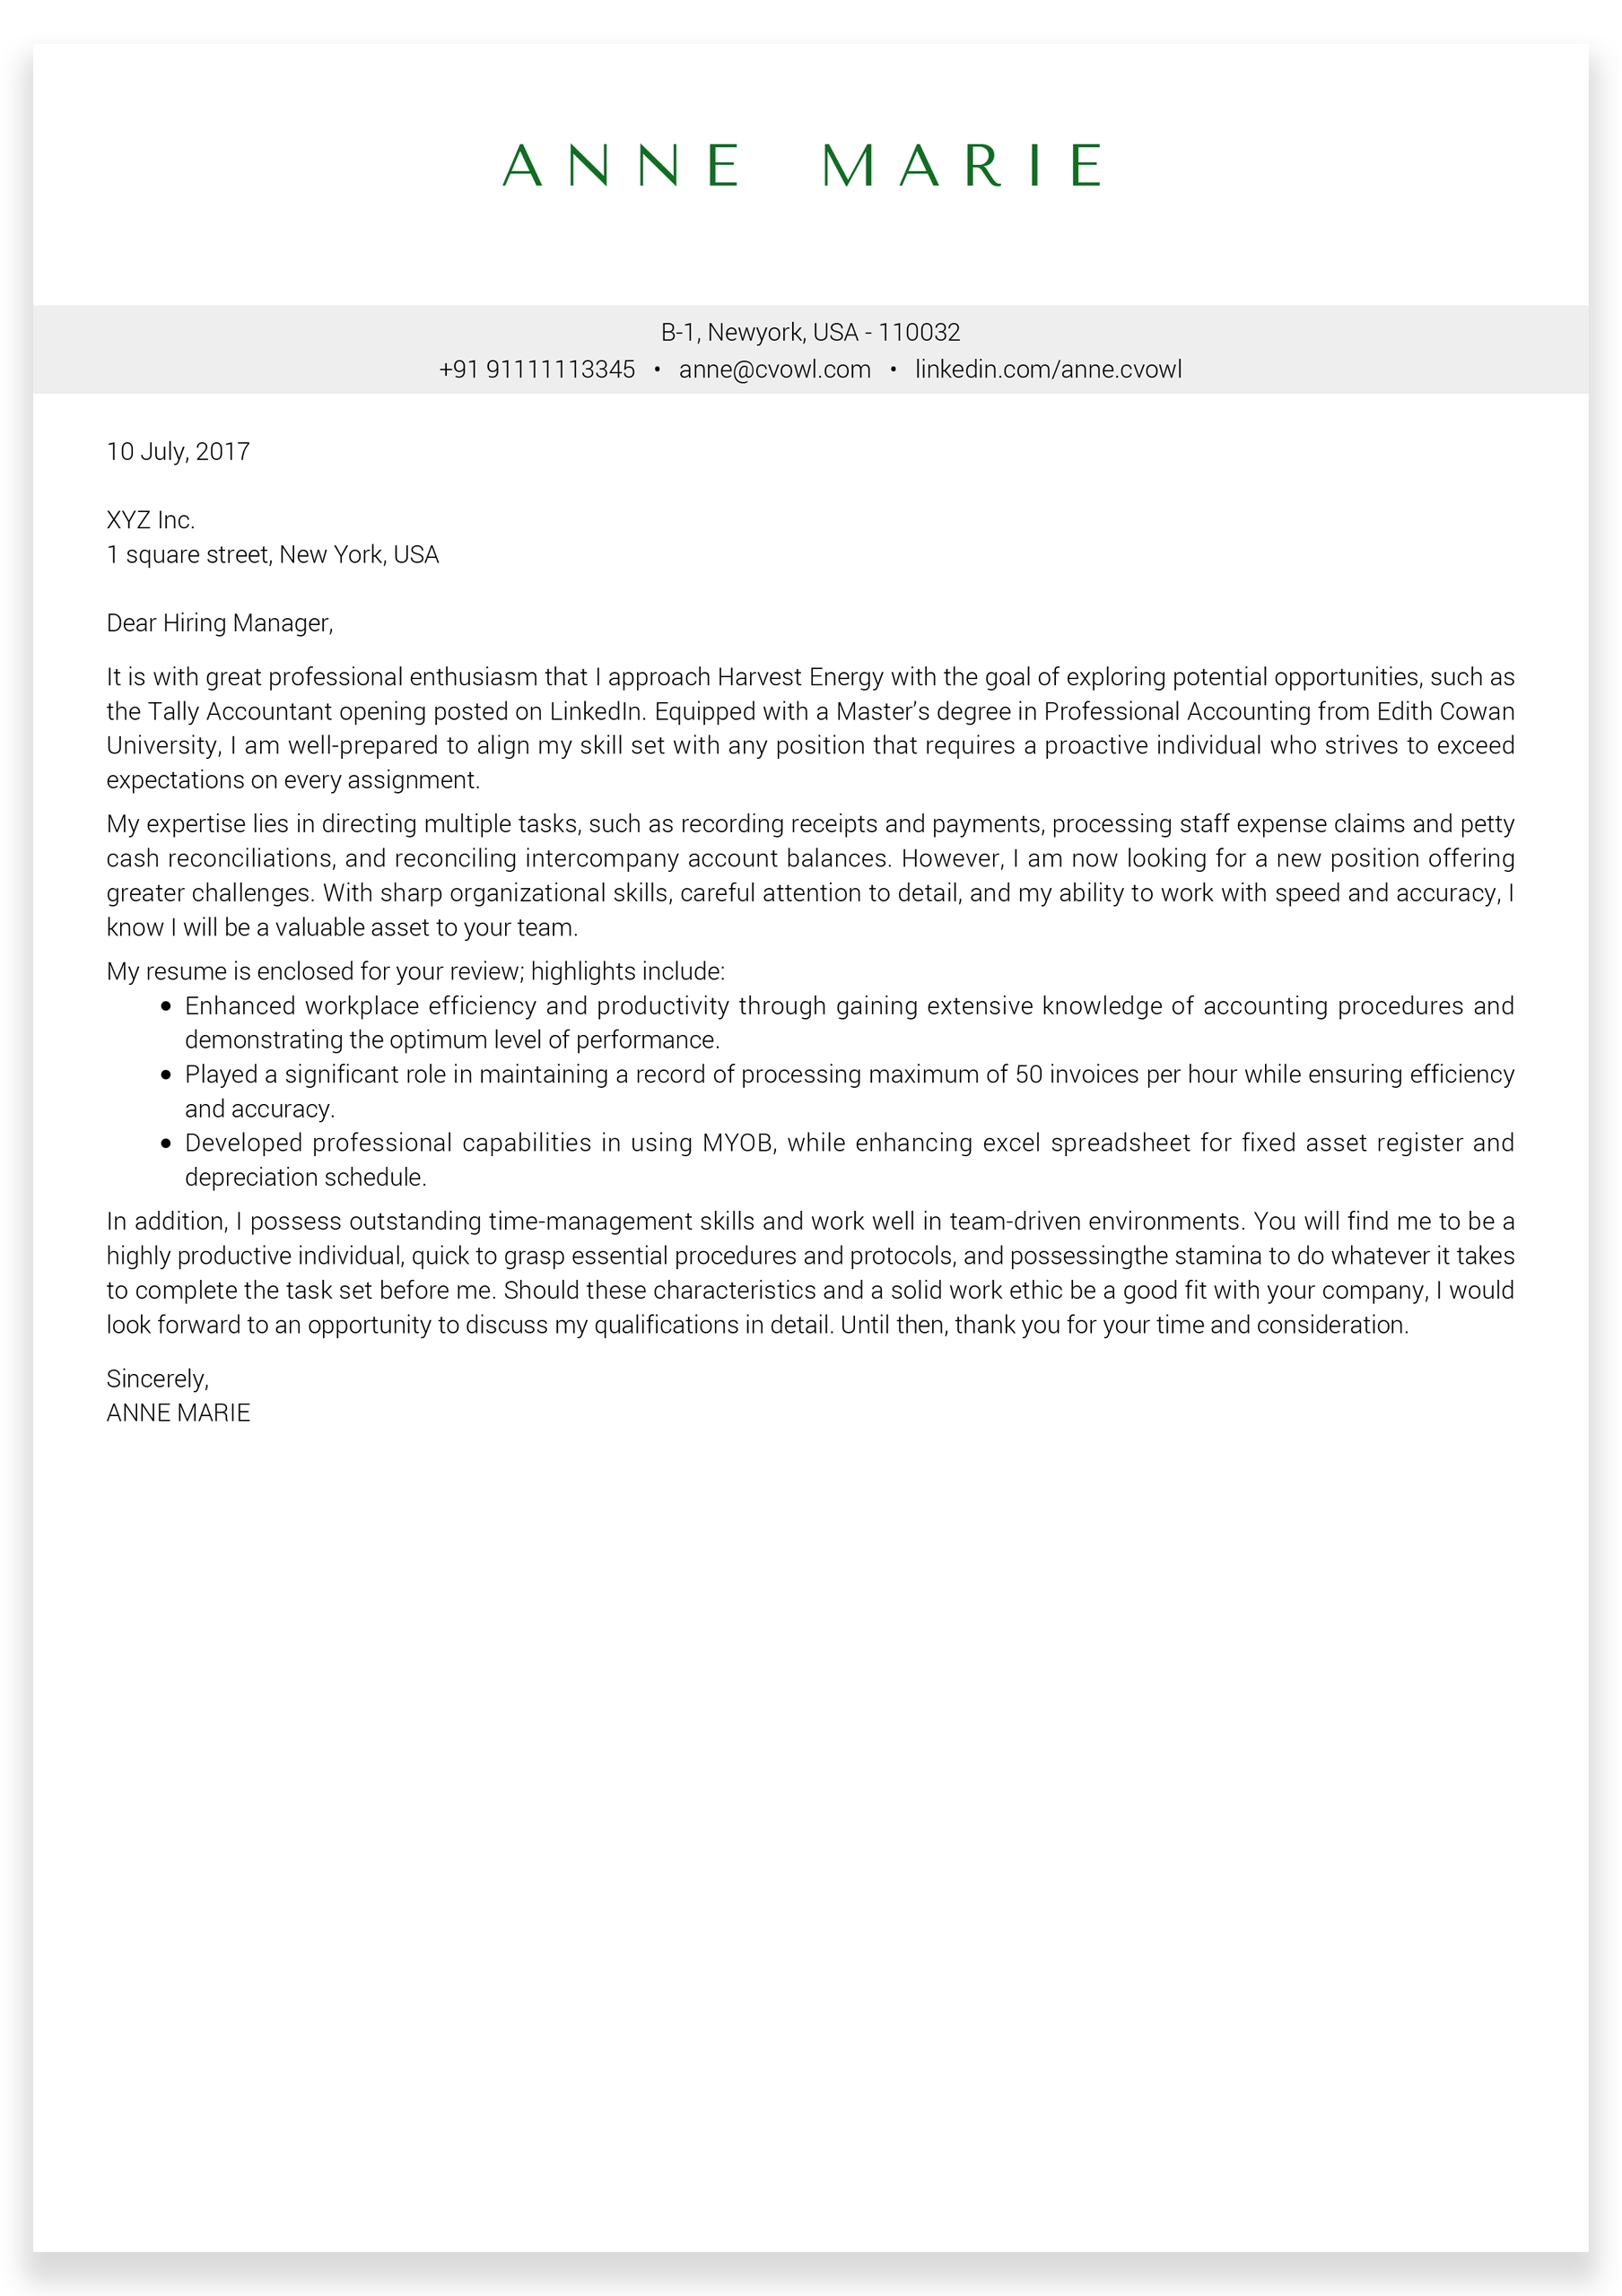 Legal-Consultant-Cover-Letter-sample5